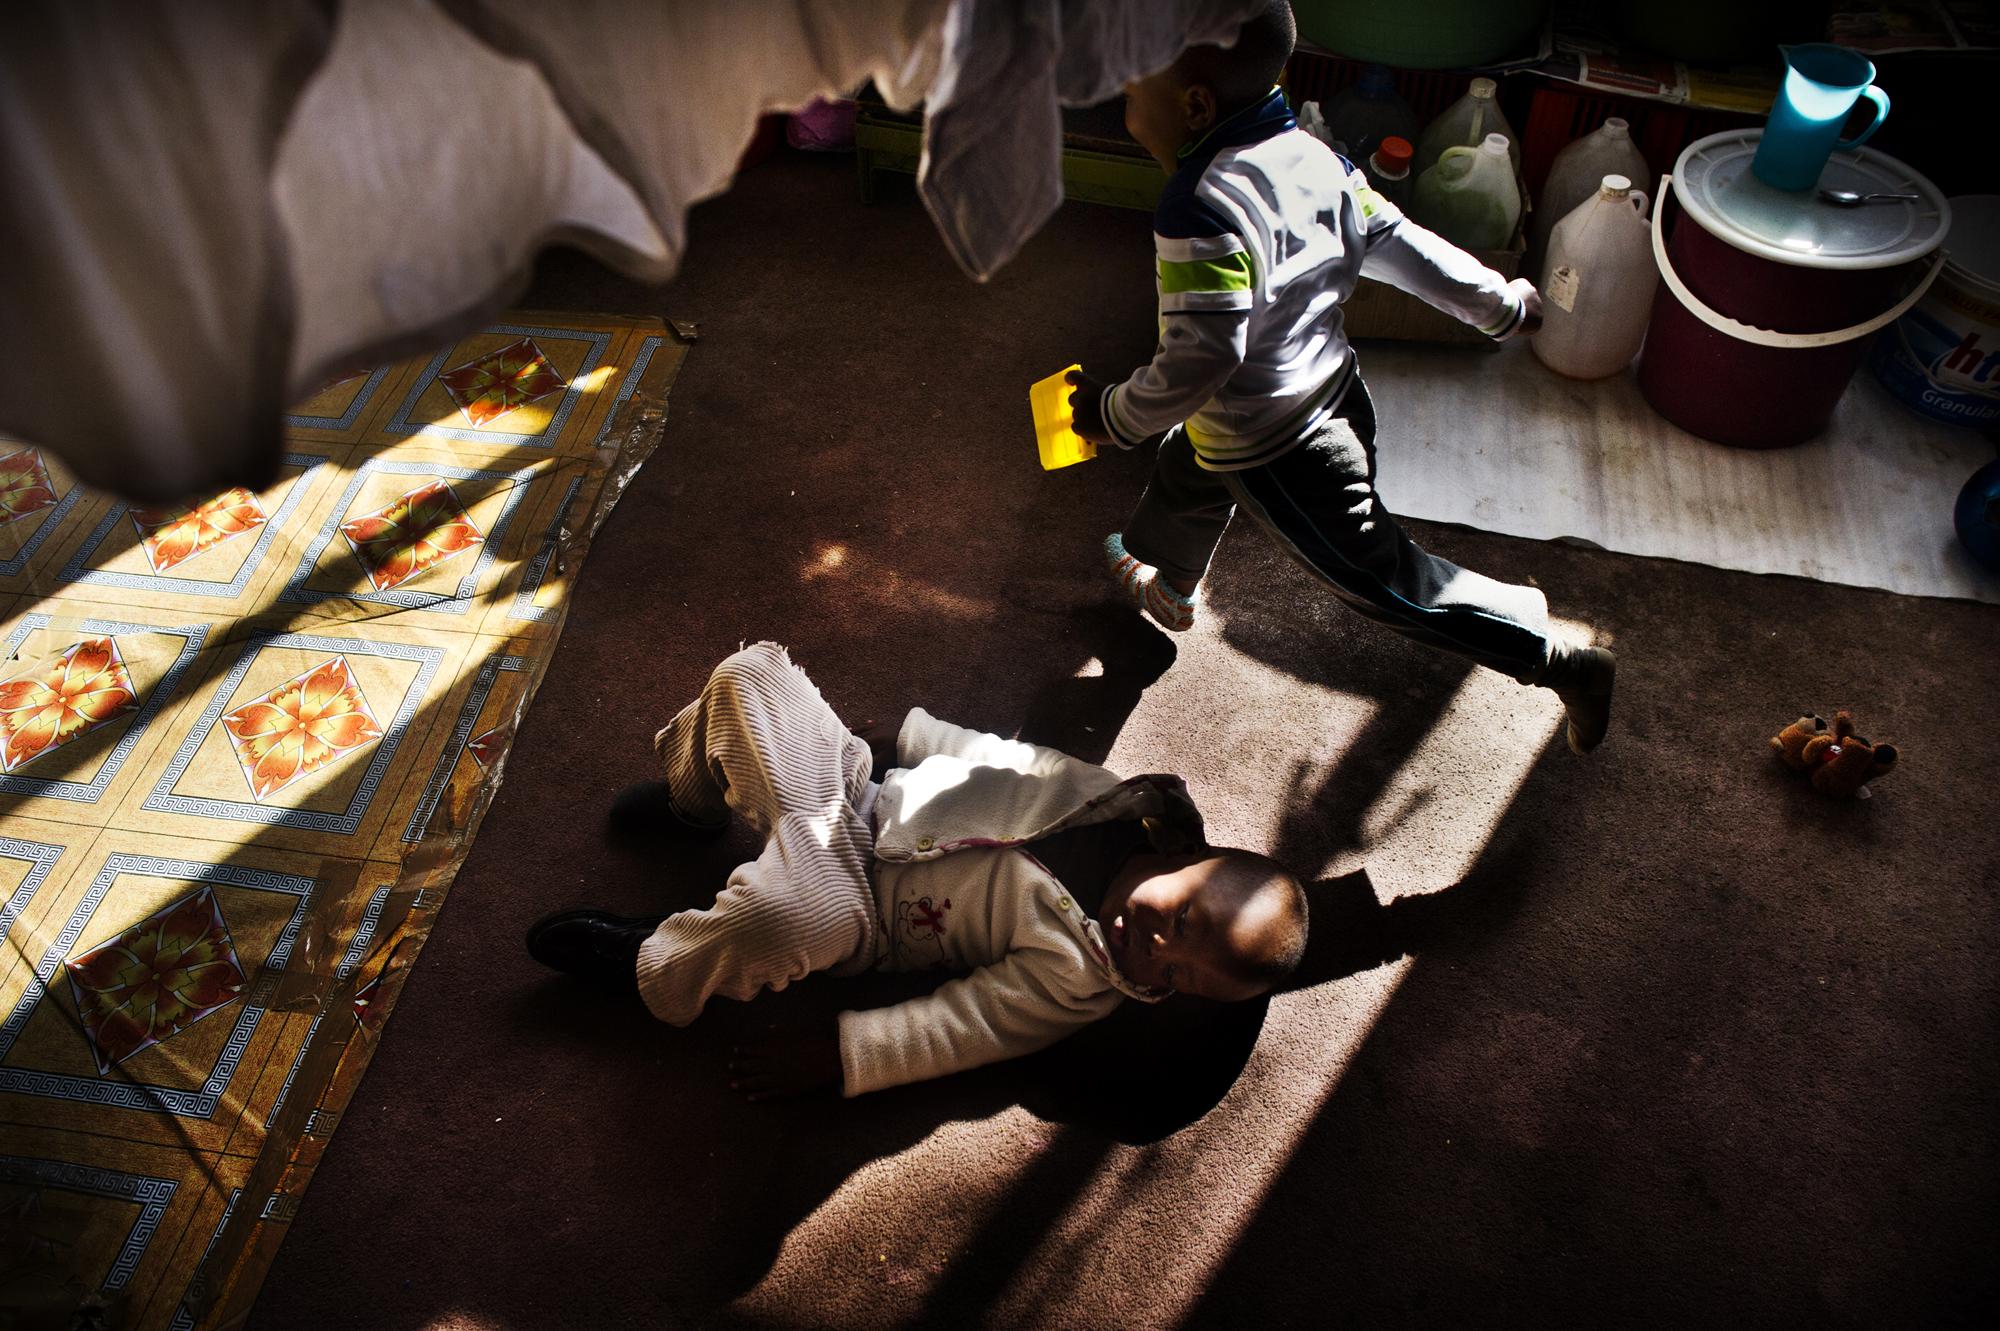 Children of the shadows - Johannesburg, South Africa.June 2012Children playing on...